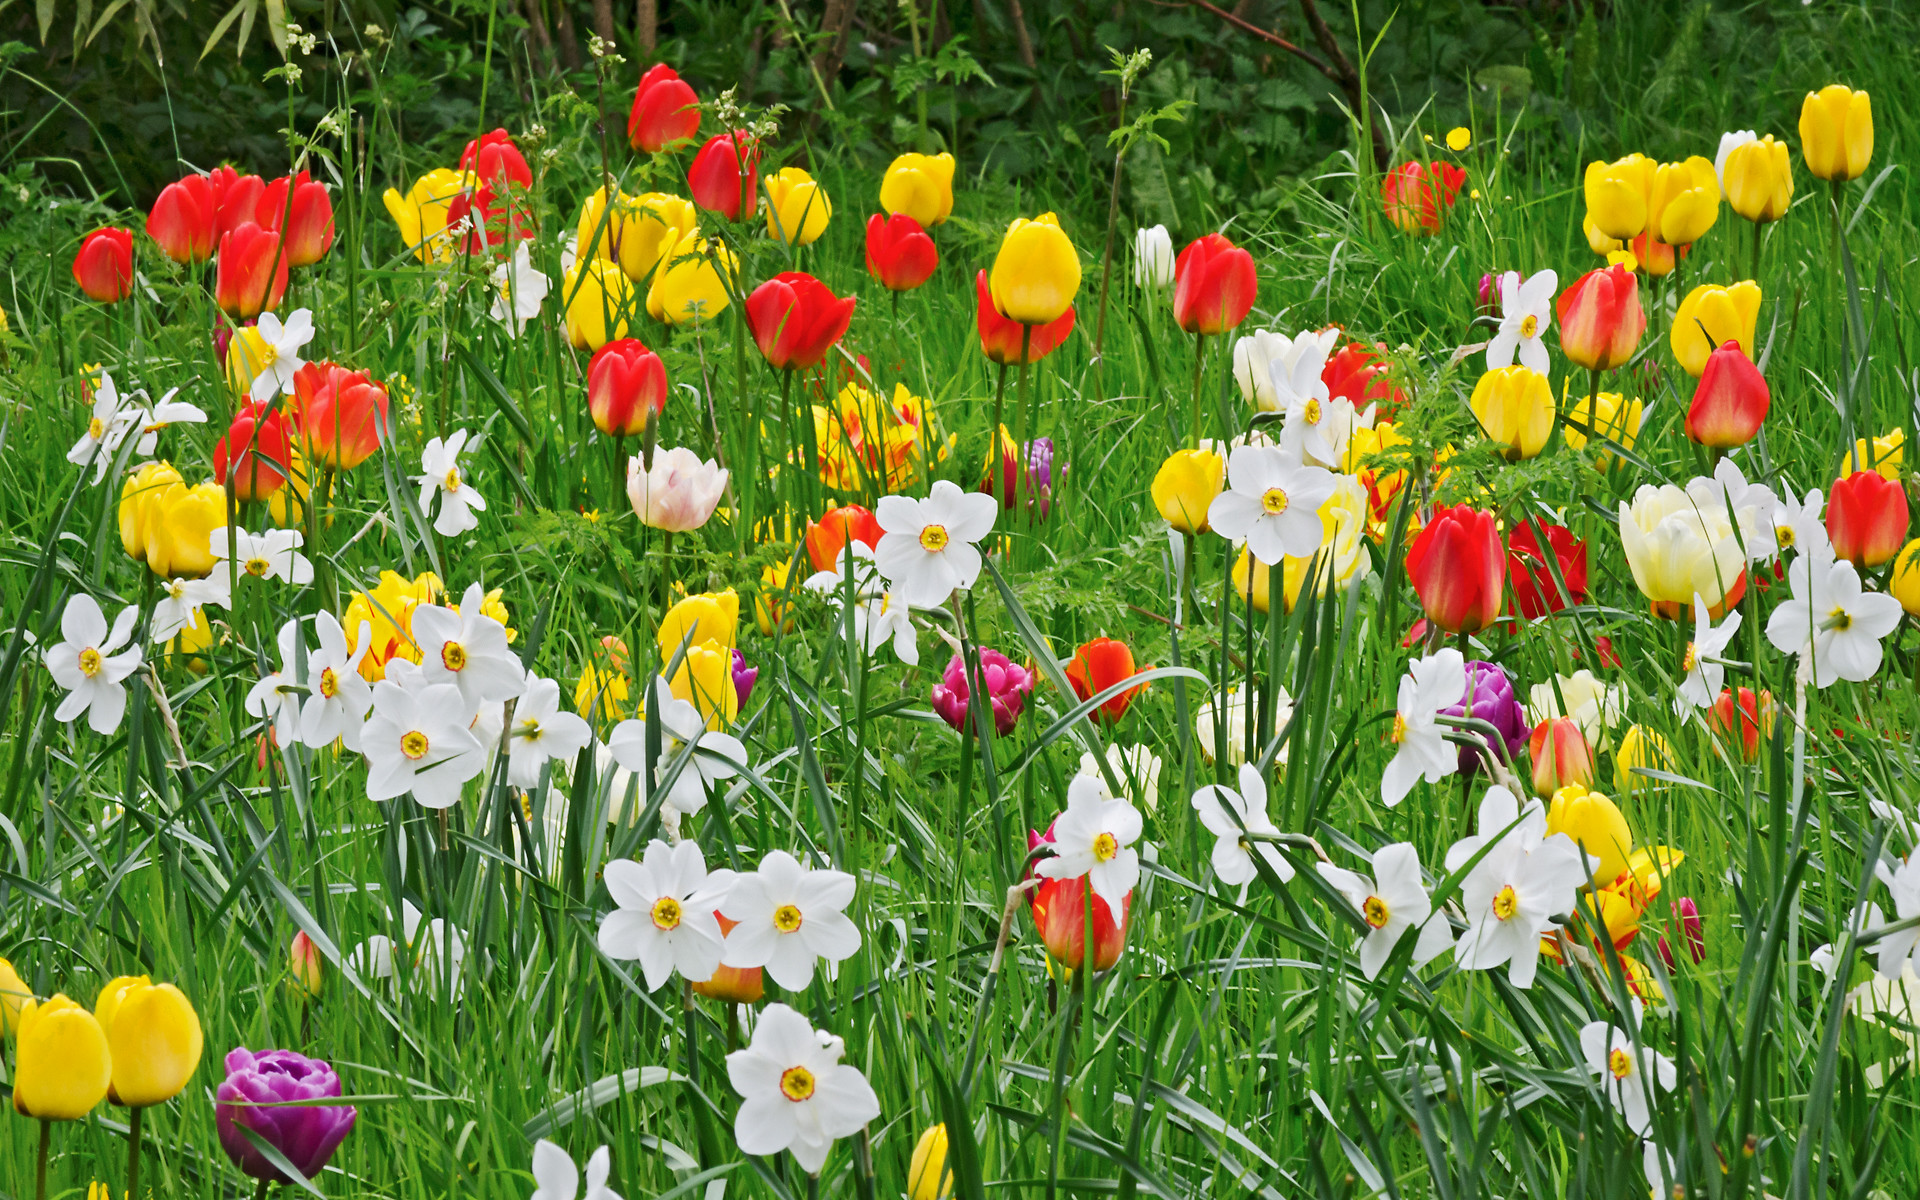 A photo of a bed of white, red, yellow flowers.